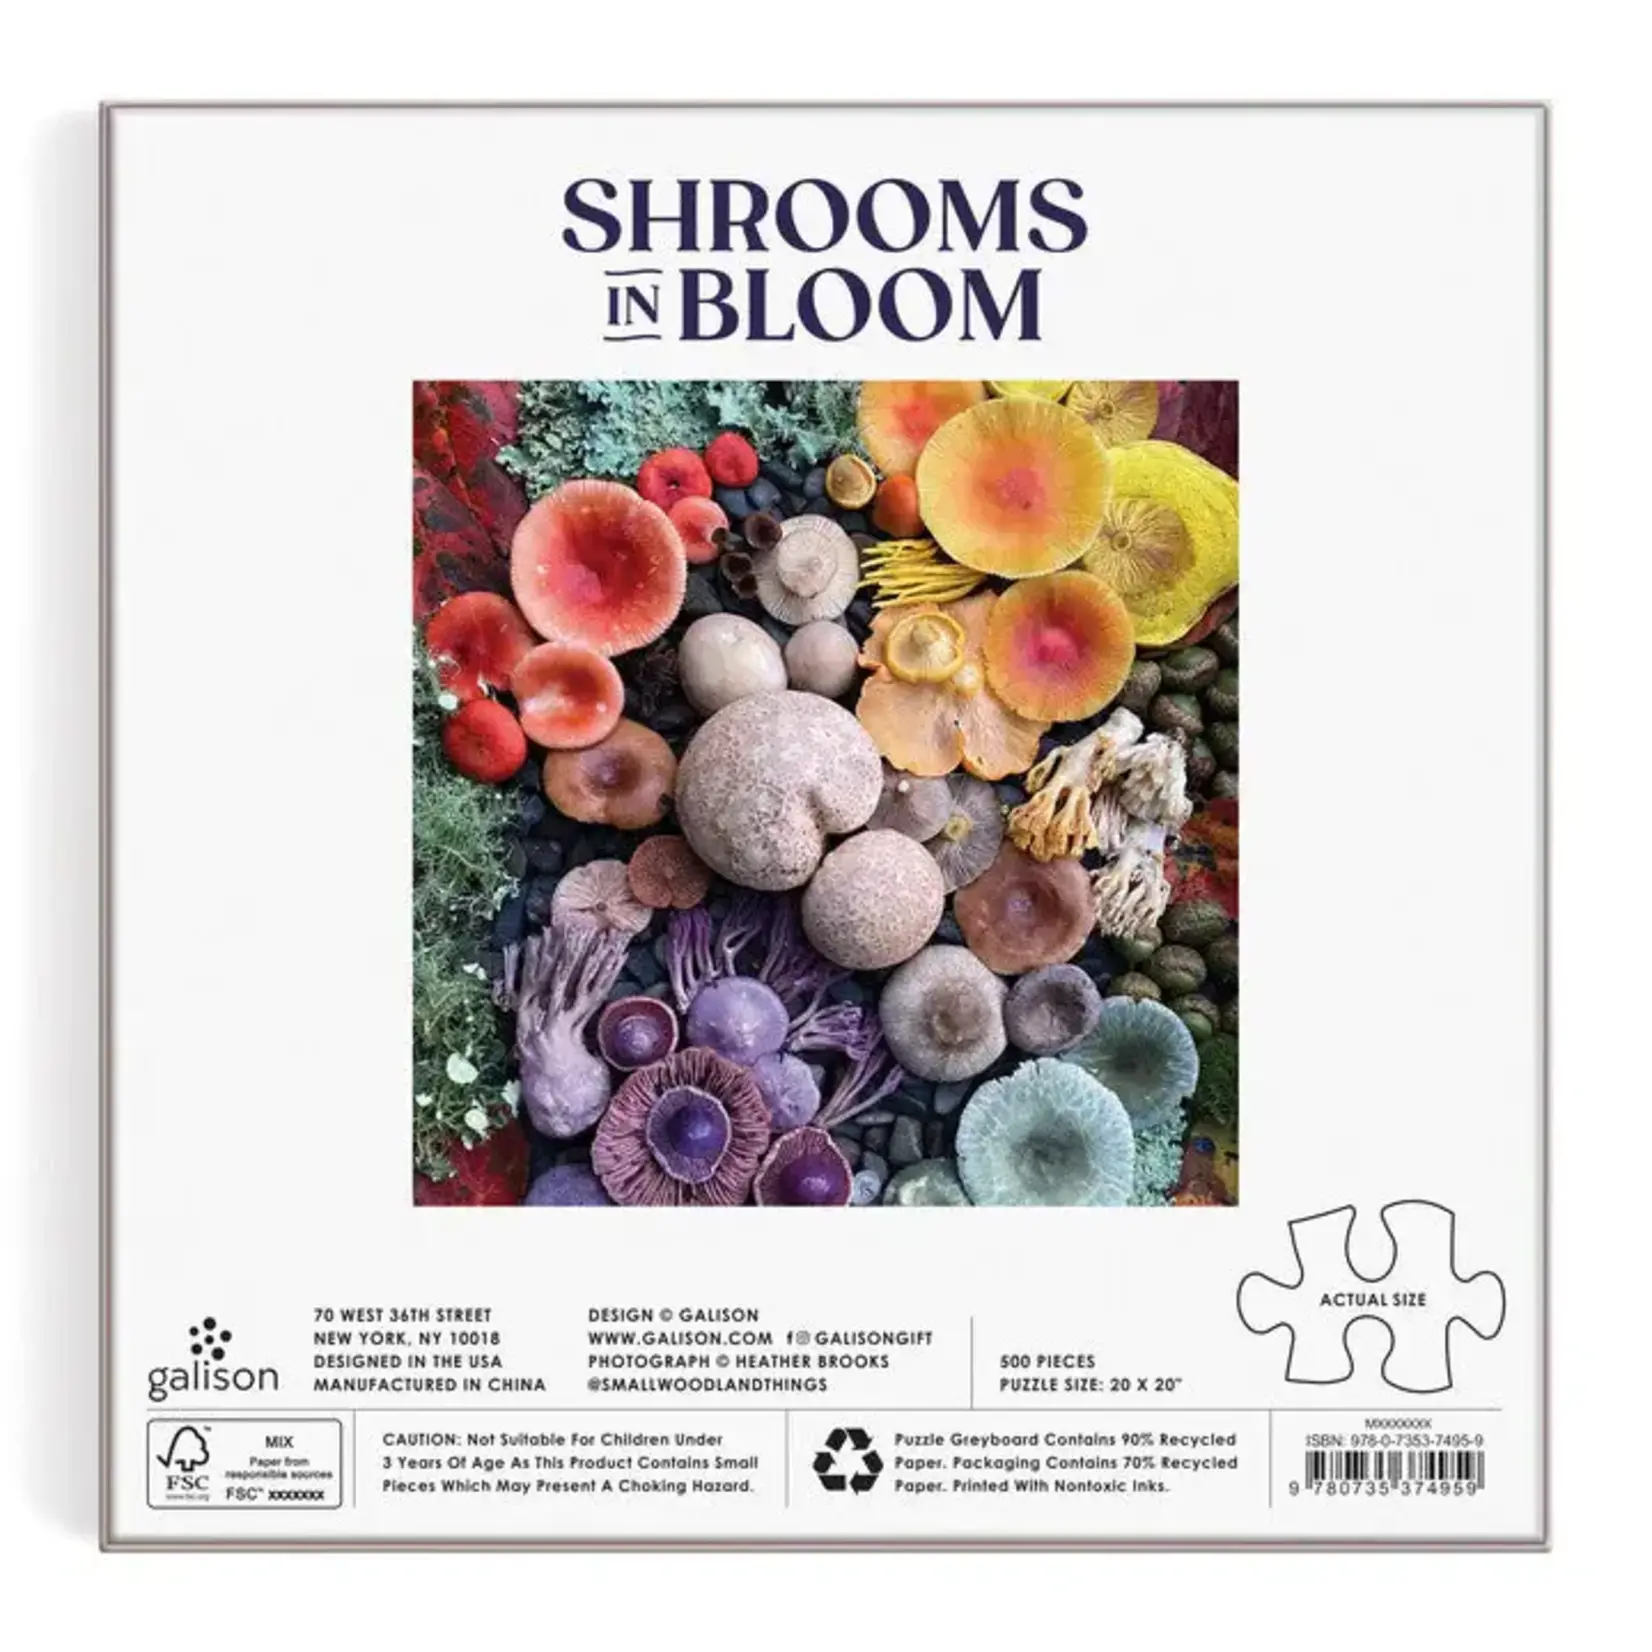 Galison Shrooms in Bloom, 500-Piece Jigsaw Puzzle